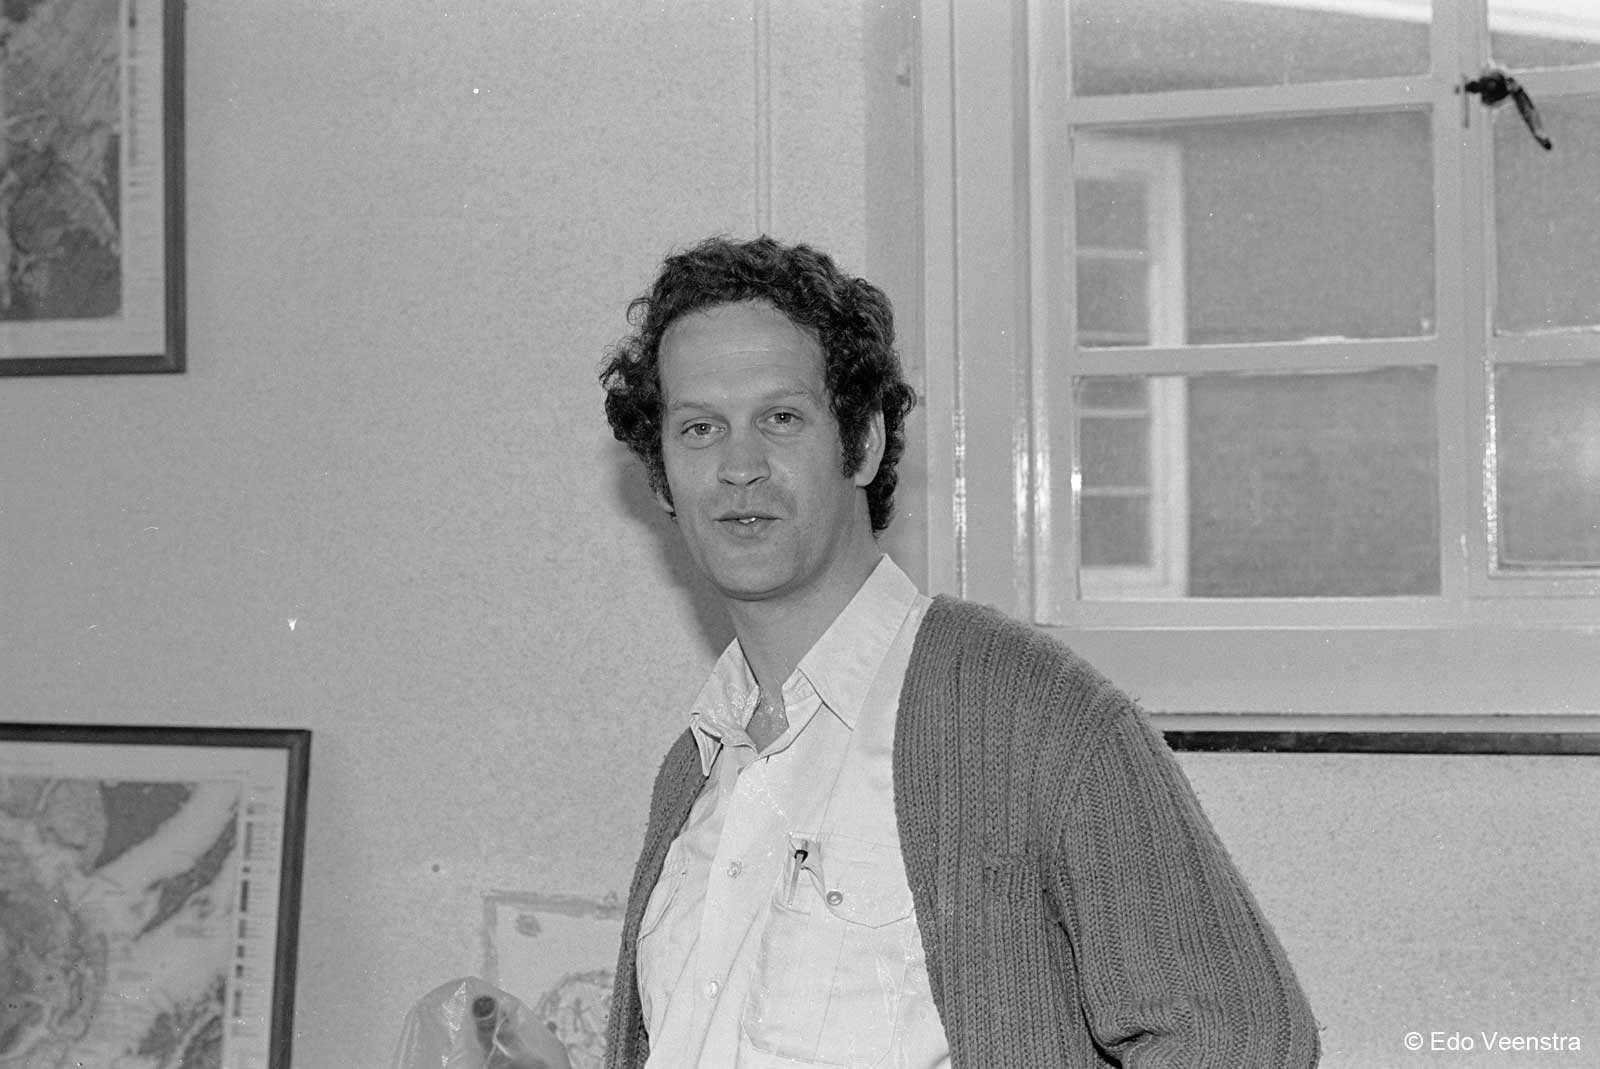 Kees Linthout